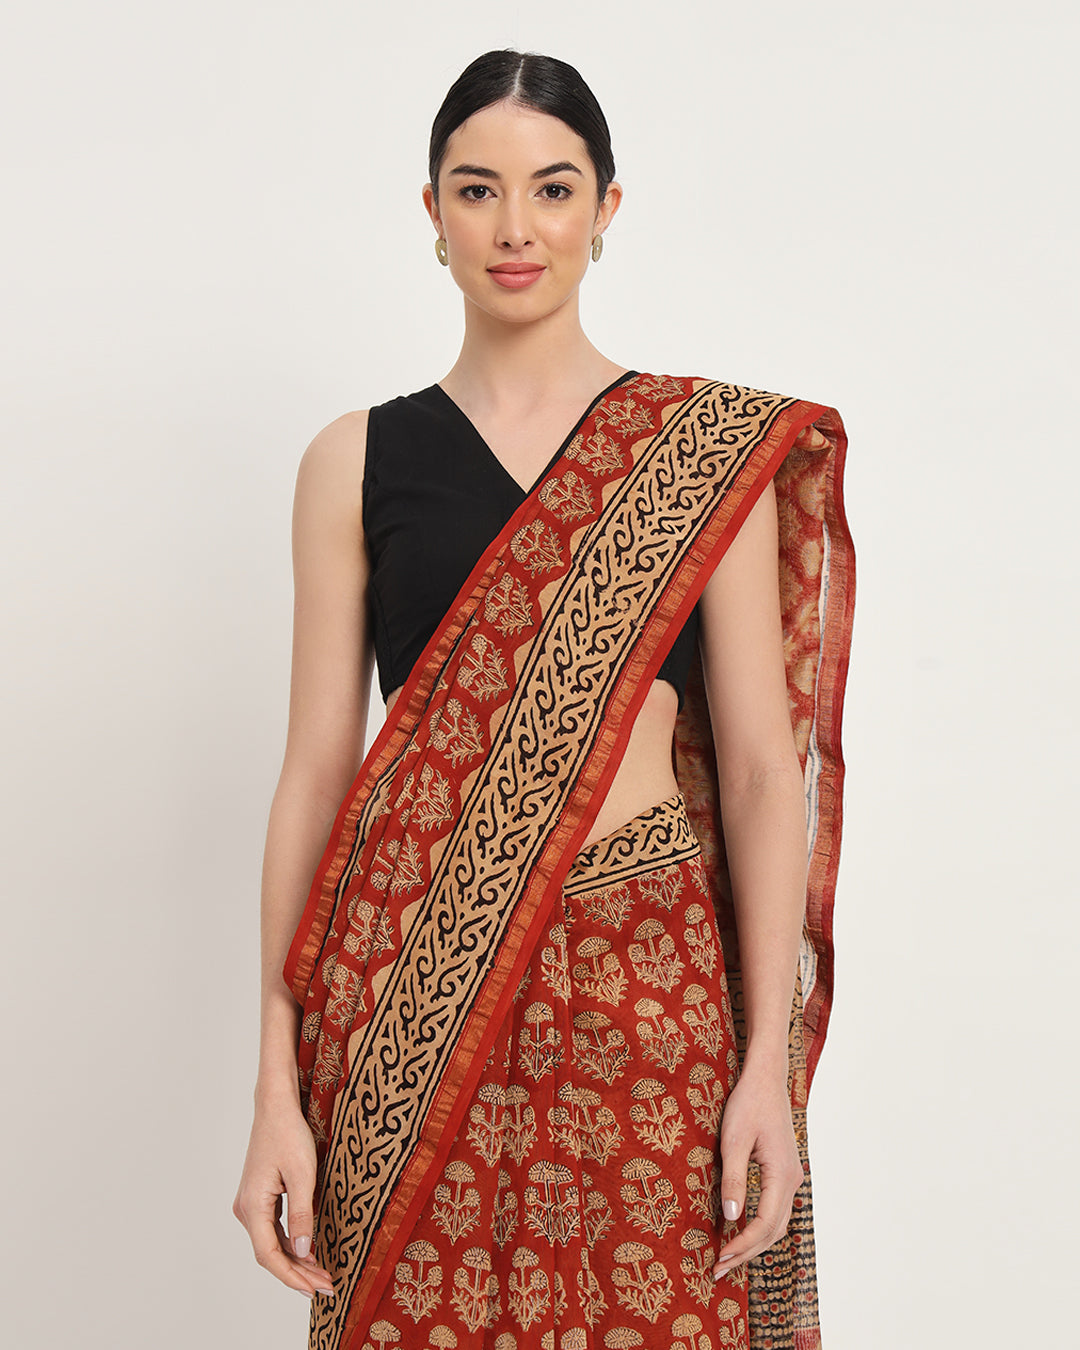 Red Dahlia - Blossoms in Every Fold Chanderi Silk Saree